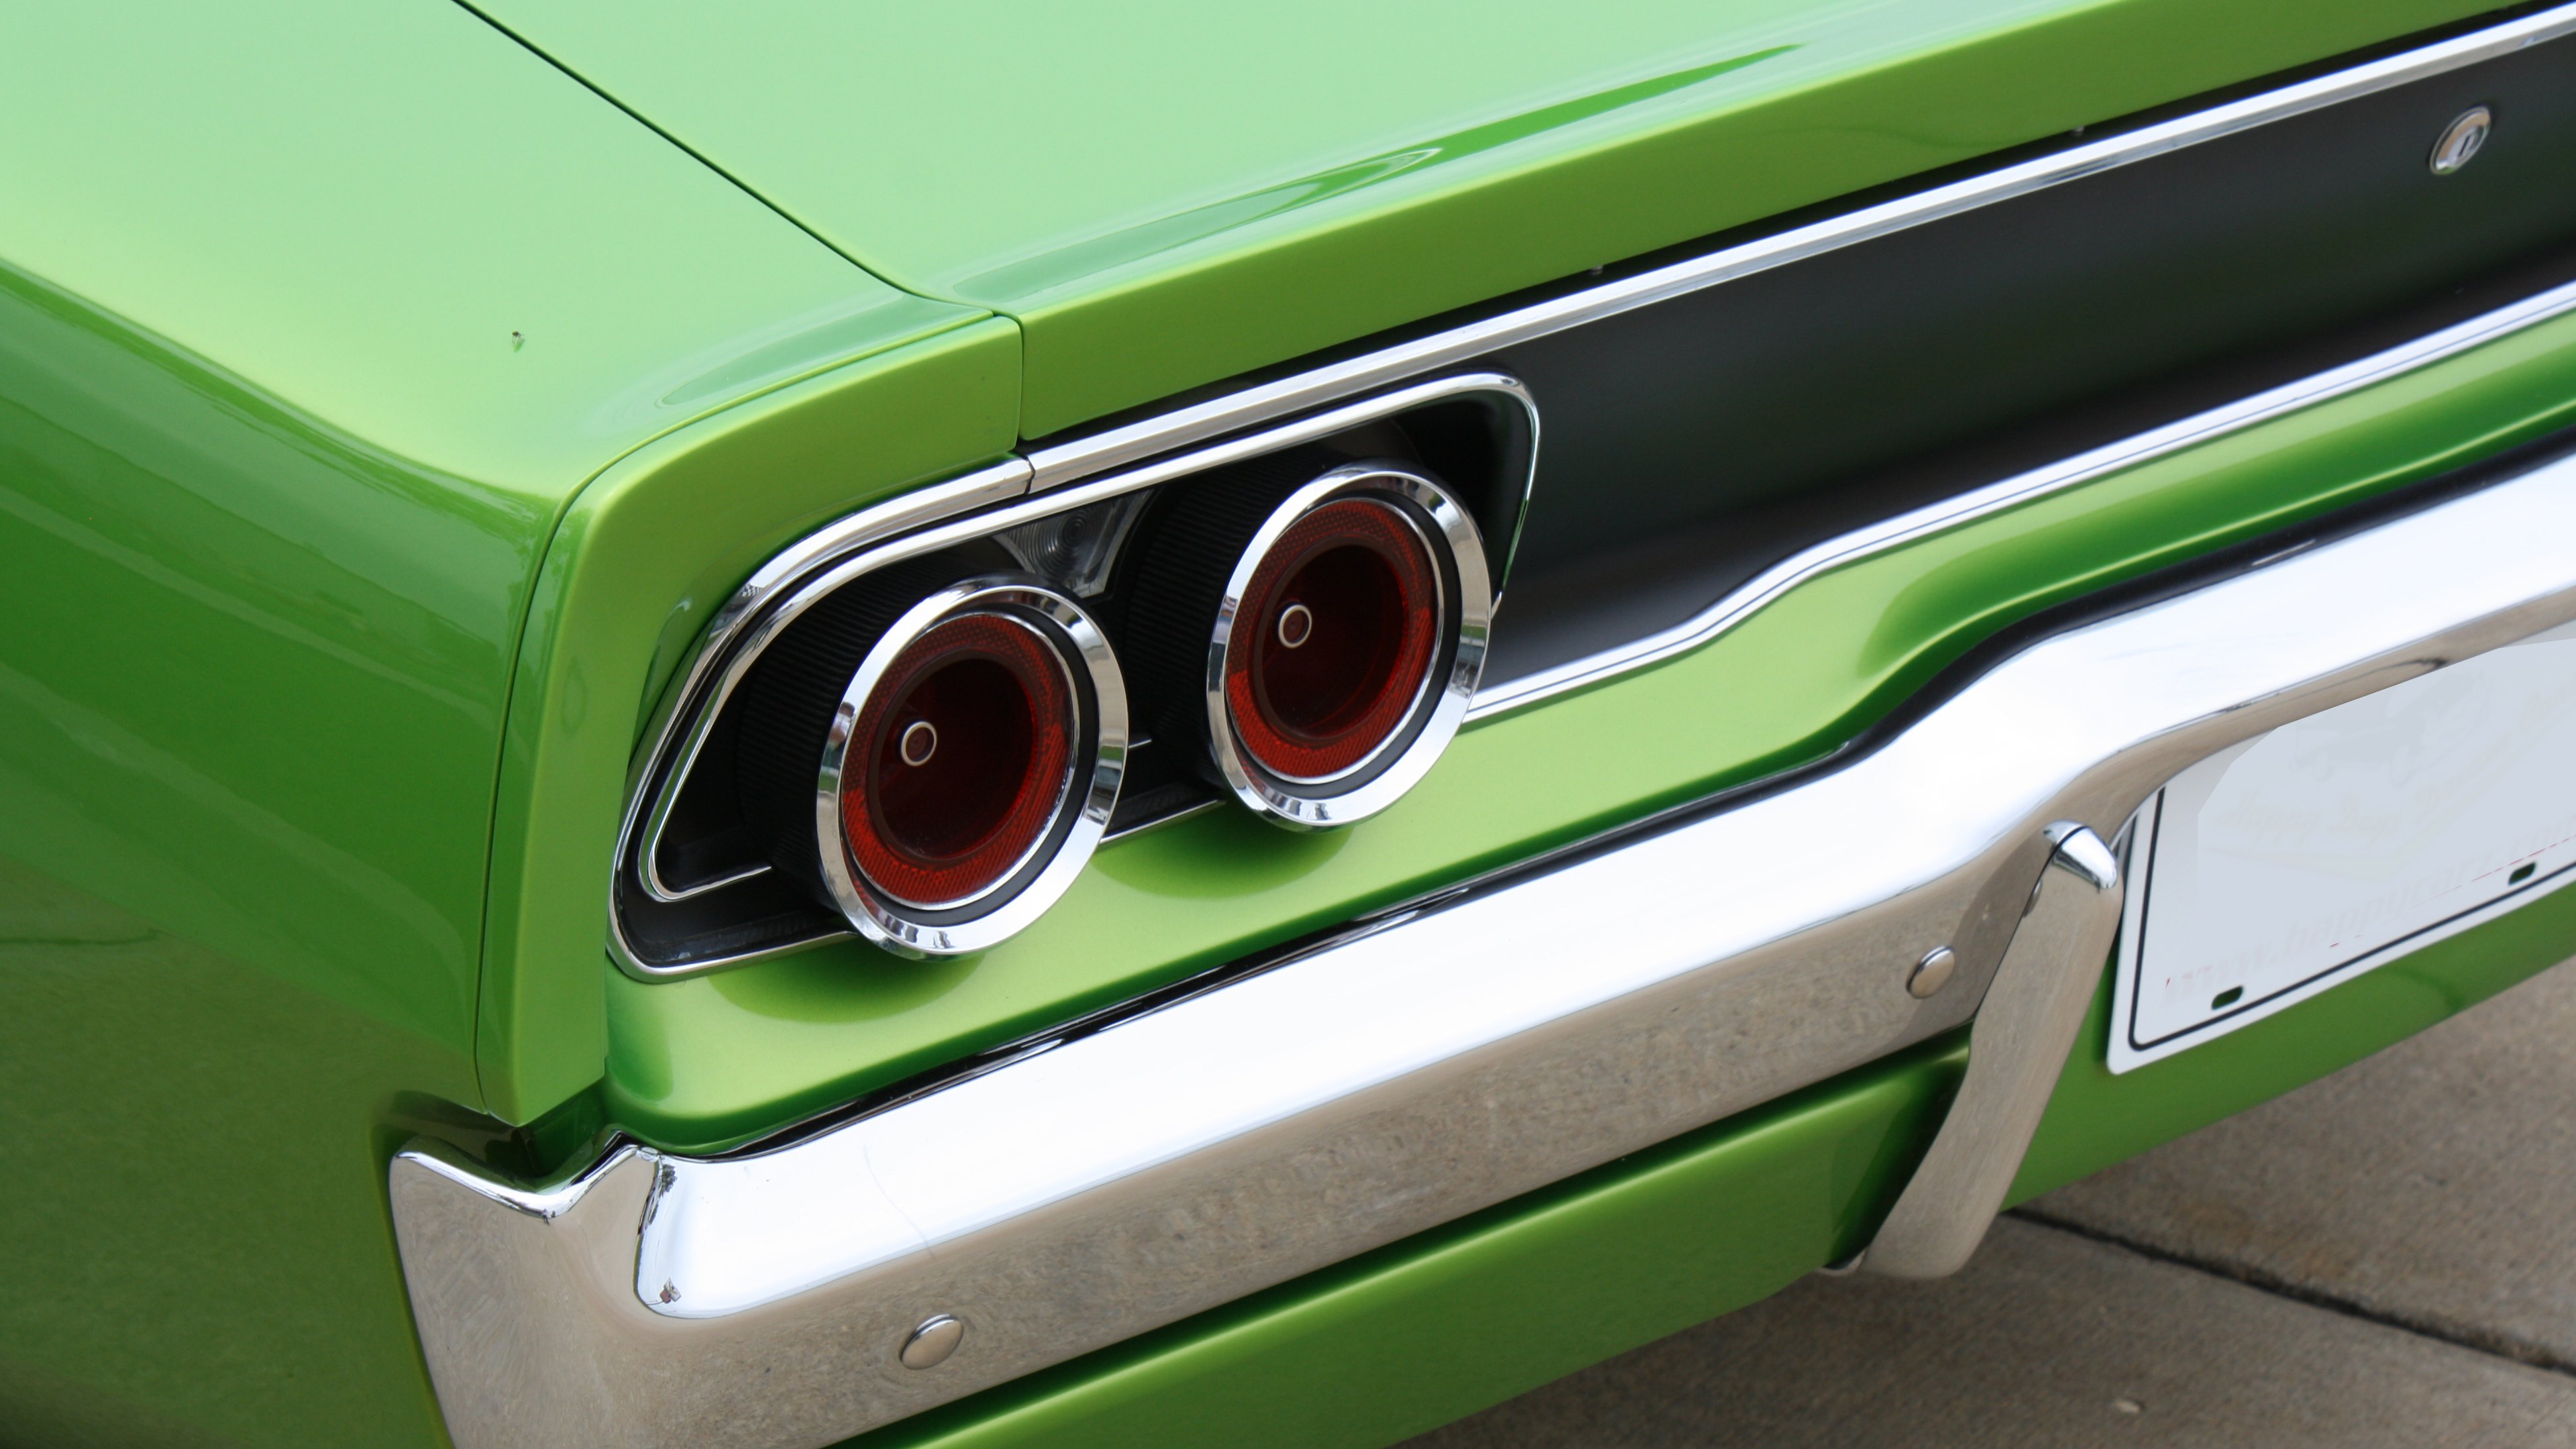 1968, Dodge, Charger, Rt, Streetrod, Street, Rod, Hot, Low, Muscle, Usa, 2888x2592 03 Wallpaper